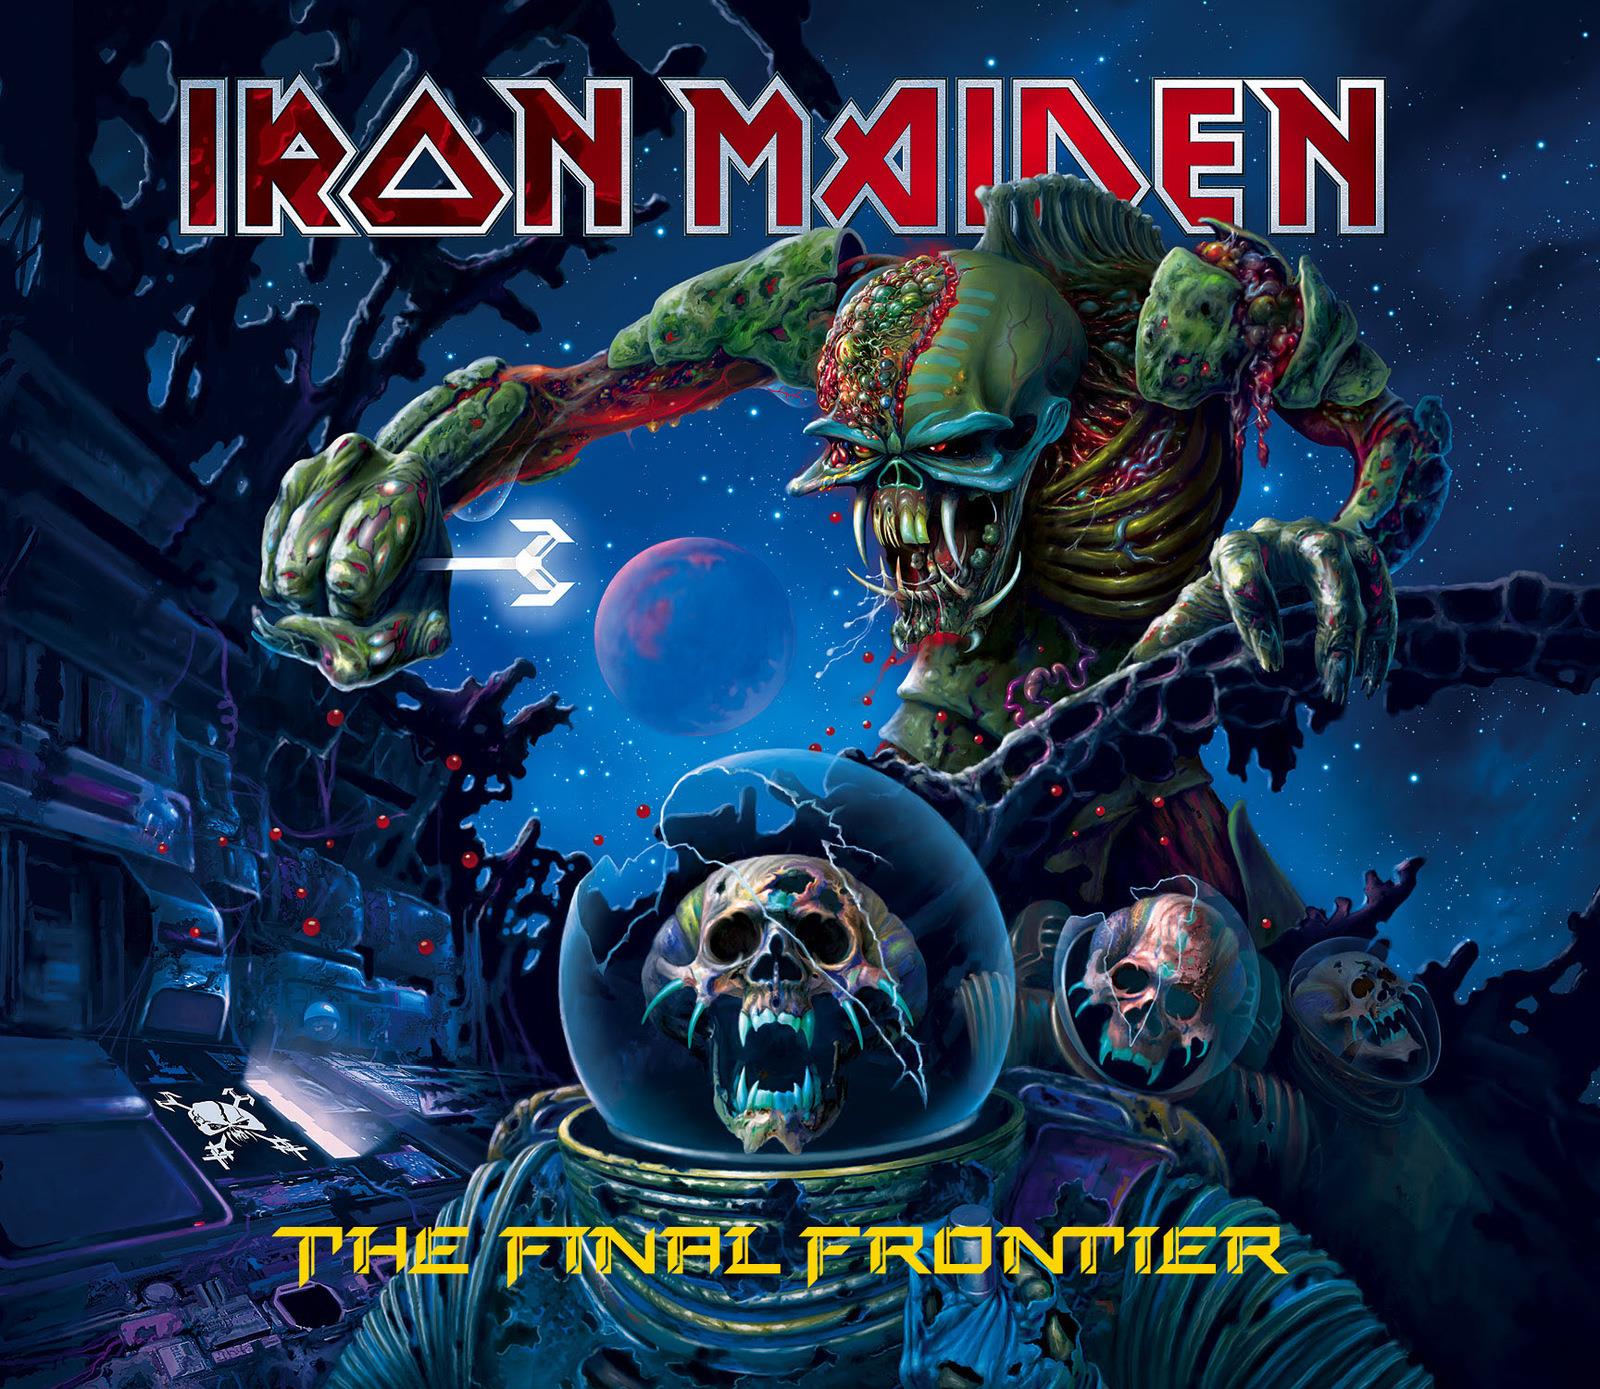 The Final Frontier (Digipak) by Iron Maiden (CD)